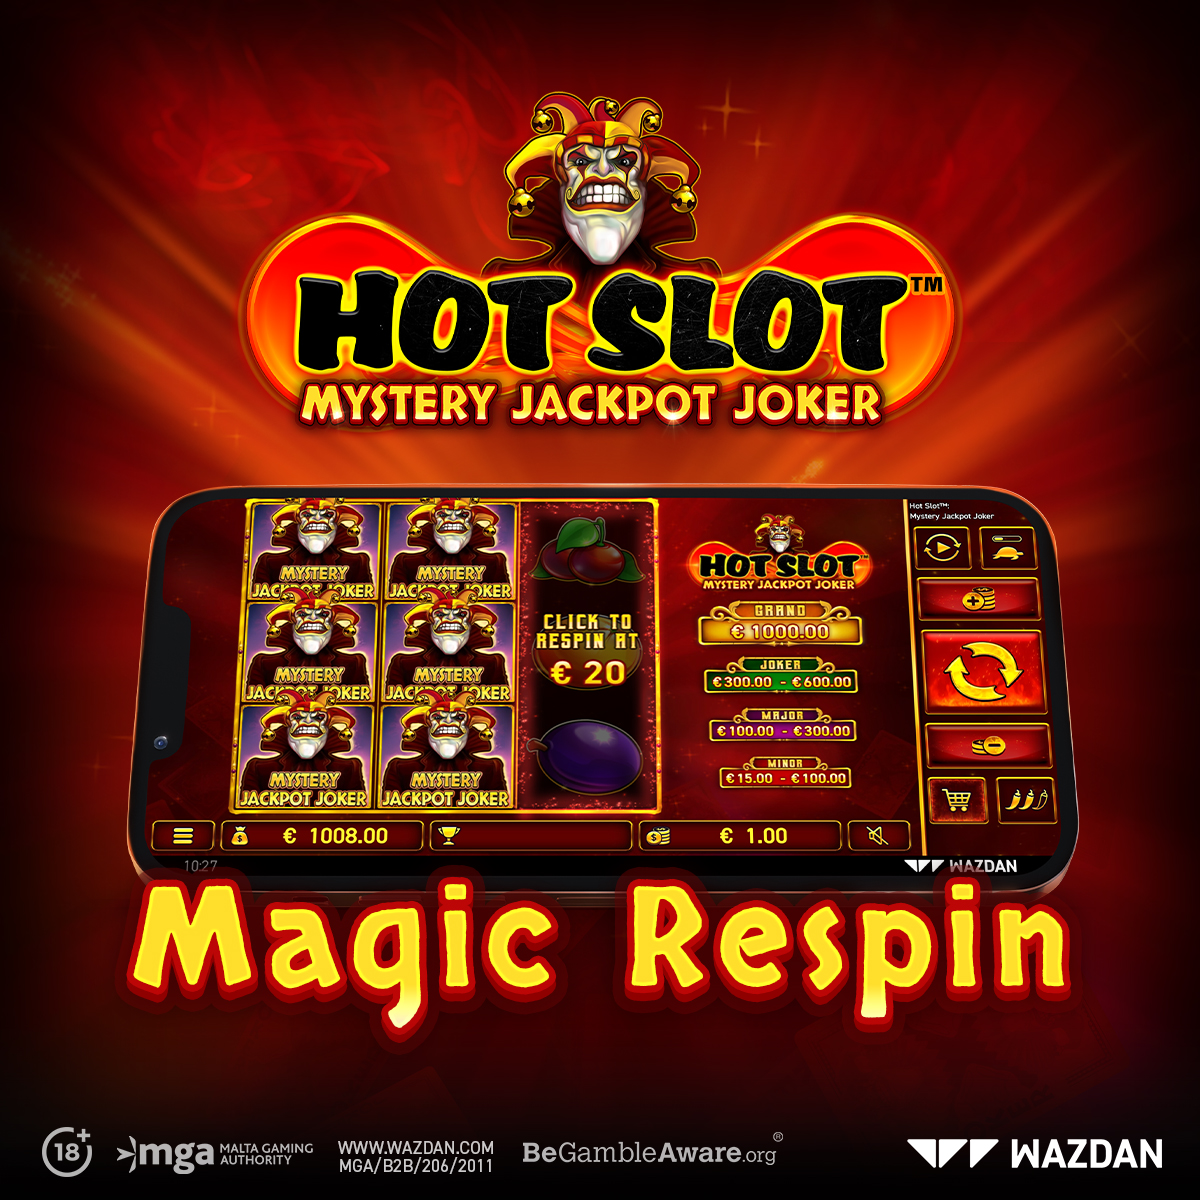 Get ready for a super thrilling adventure with Hot Slot™: Mystery Jackpot Joker! &#127183; Use the Magic Respin feature to help you spin your way to the Grand Jackpot! &#129313;

18+ | Play Responsibly

&#160;&#160;